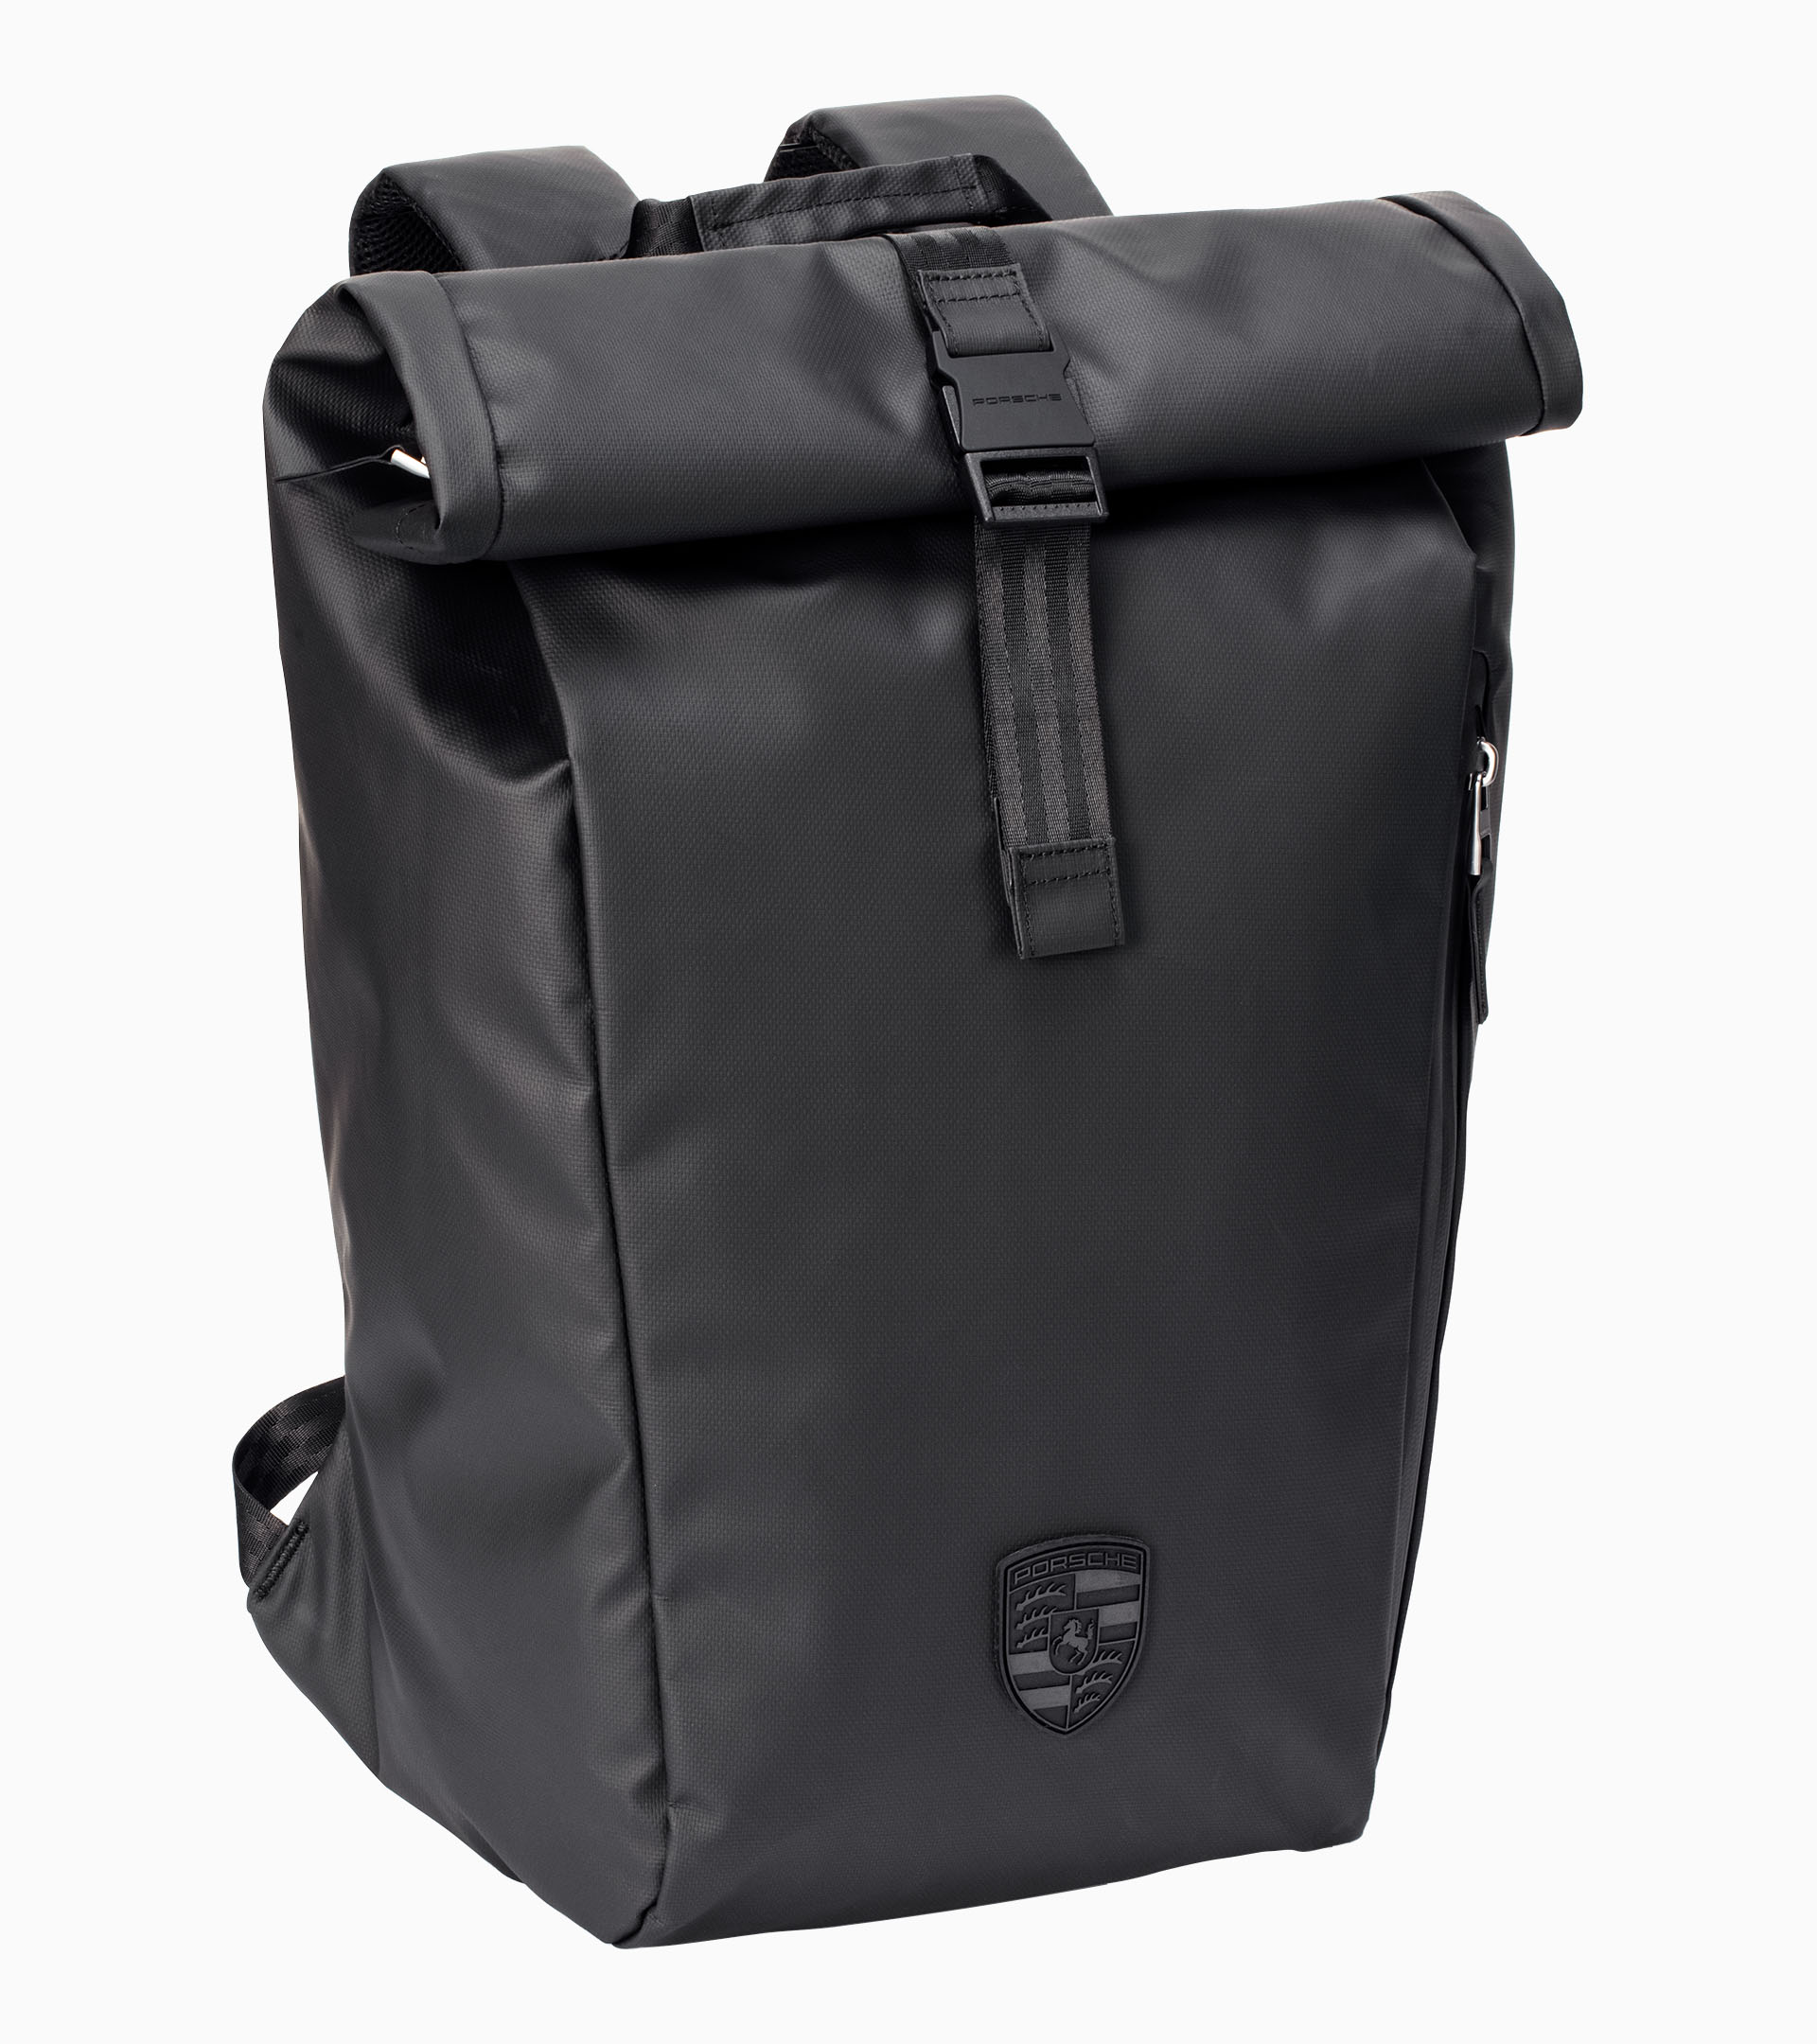 Taycan backpack - Bags & Luggage | Porsche Design